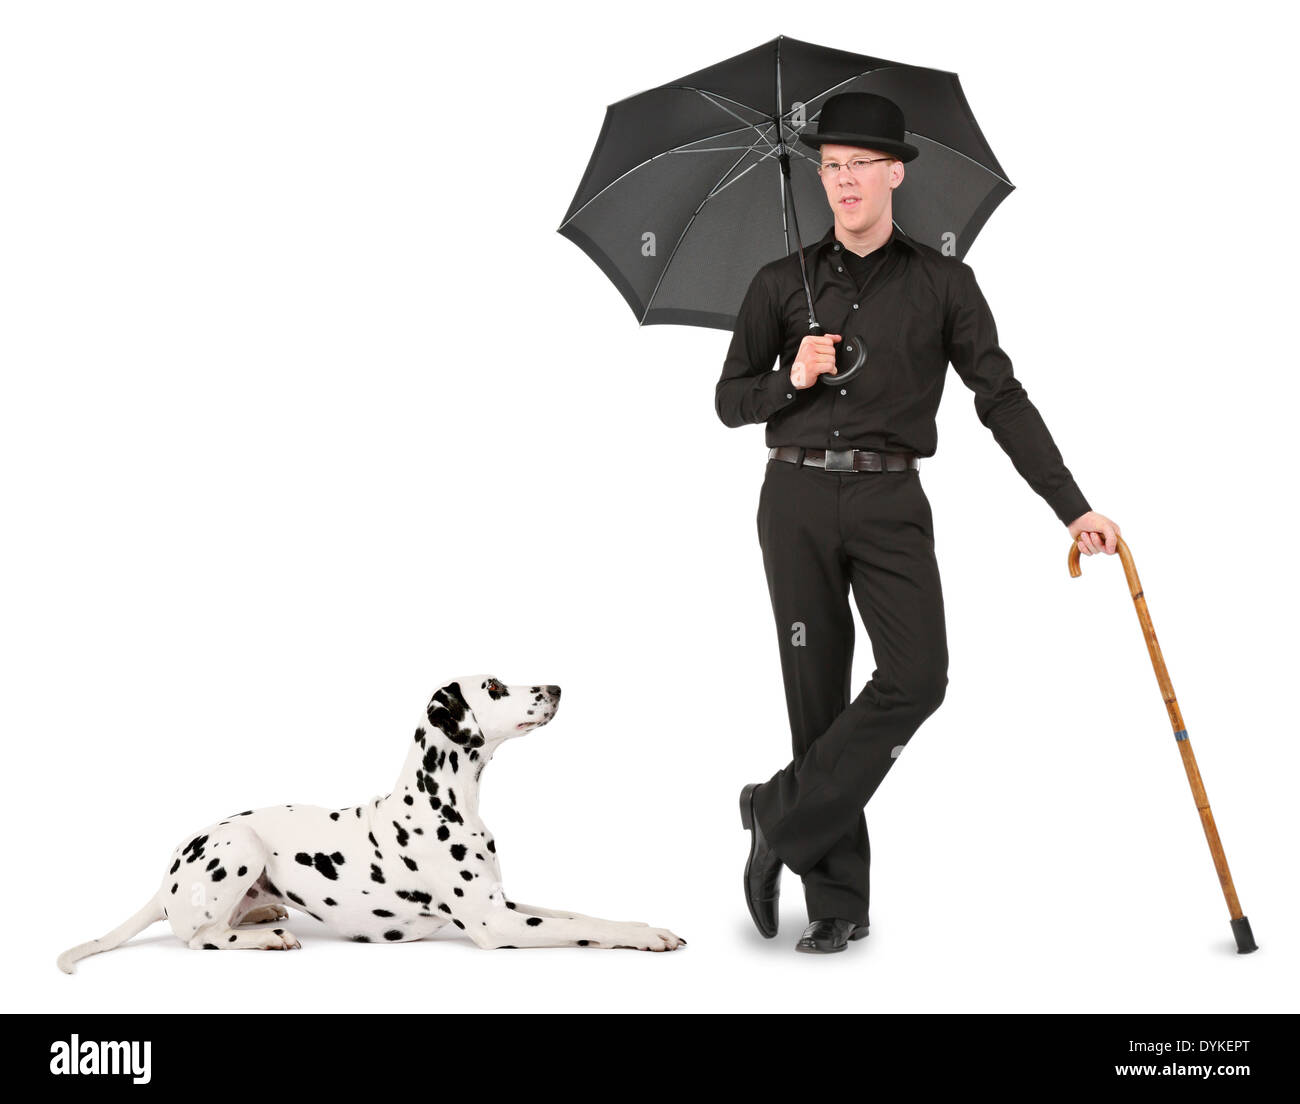 young man with bowler hat, umbrella and walking stick Stock Photo